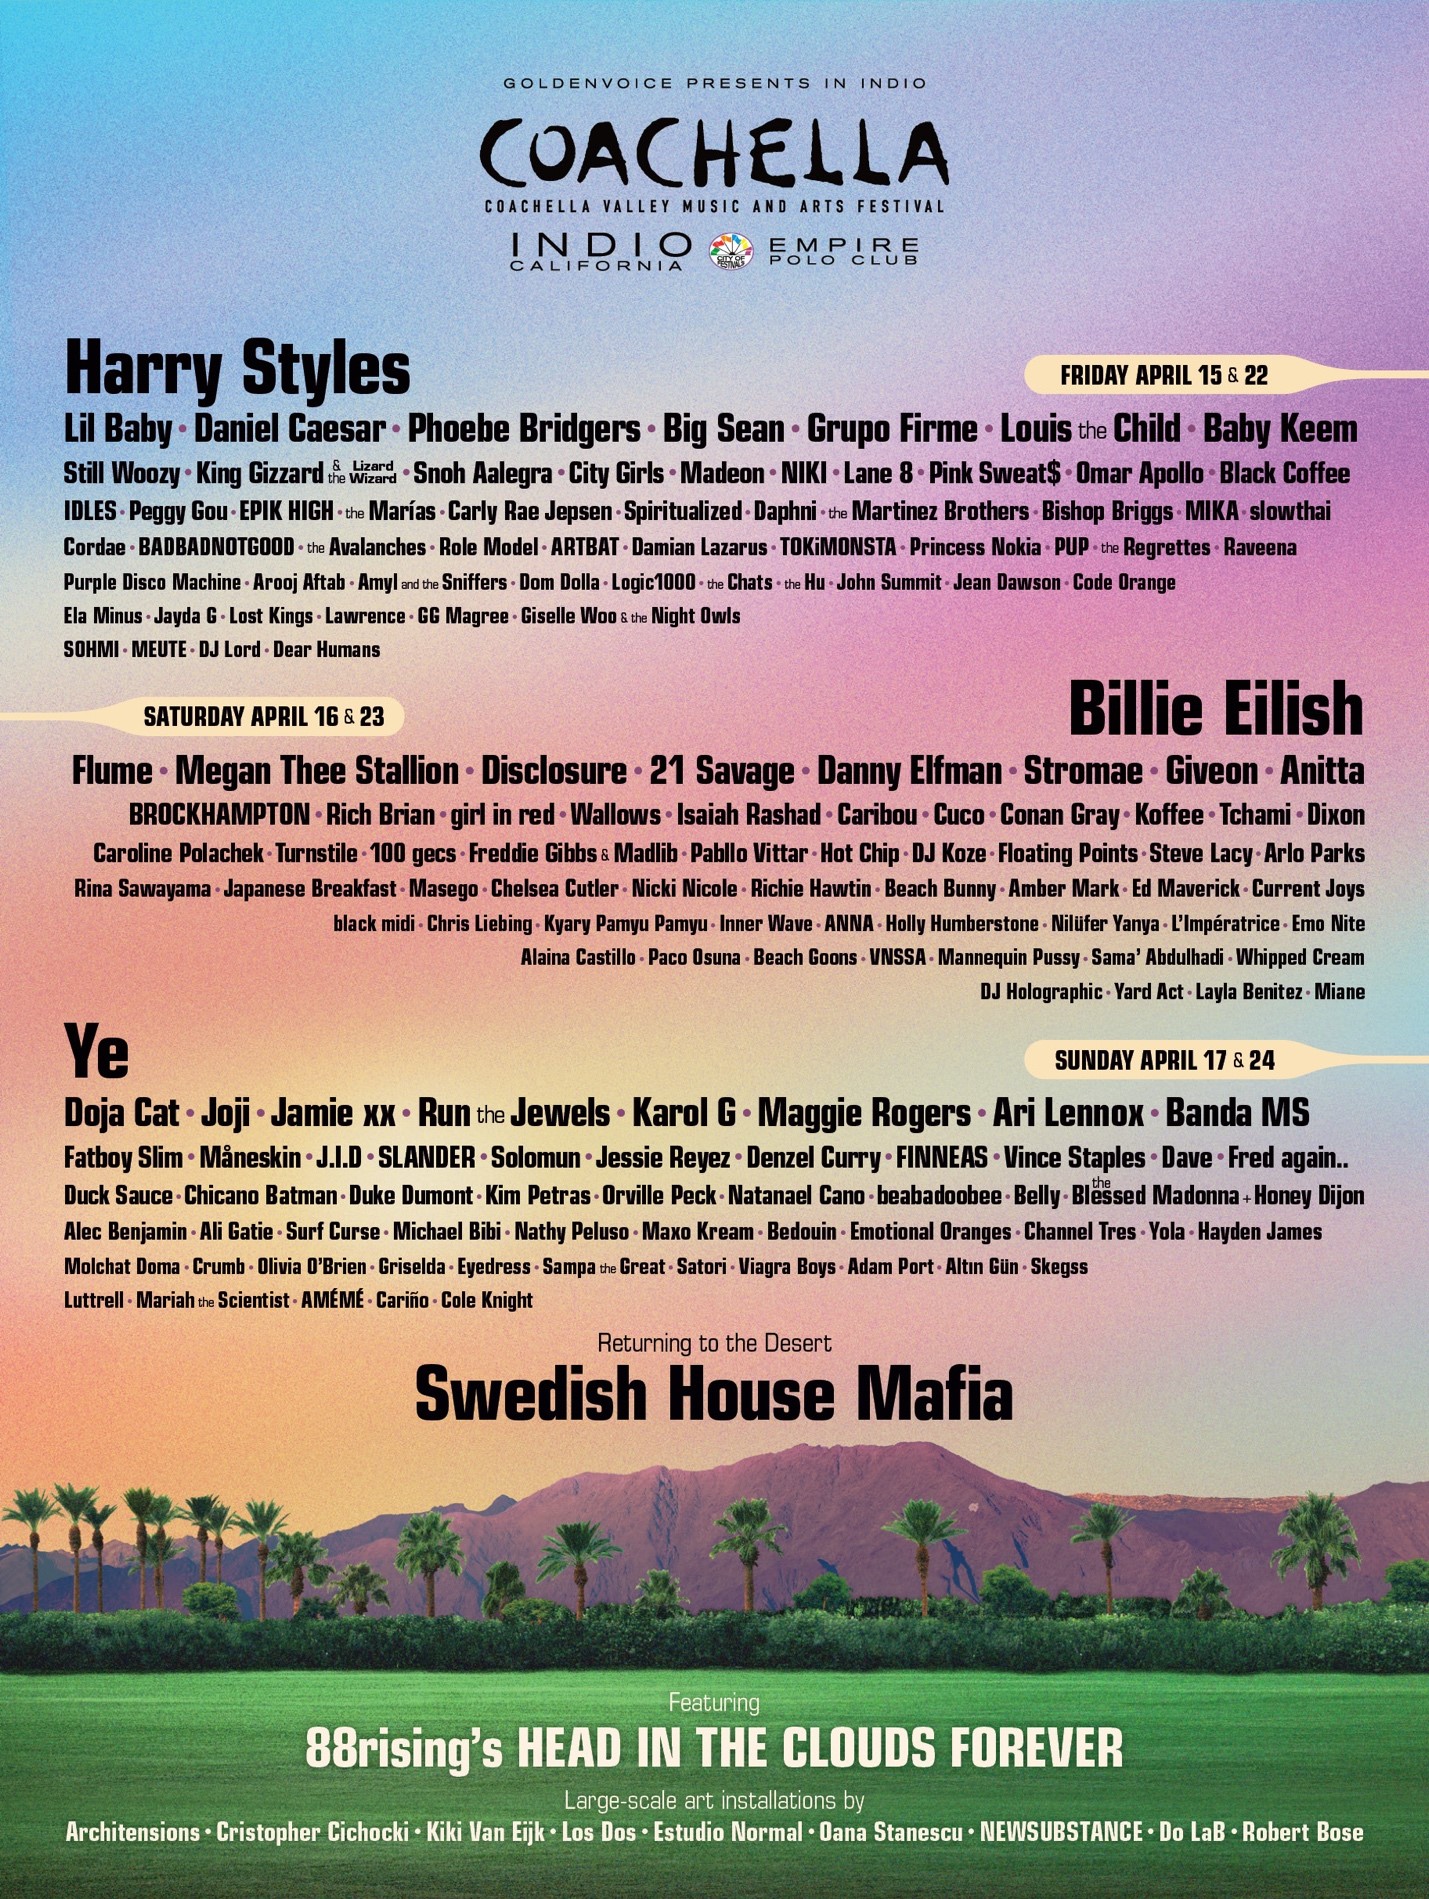 Coachella Lineup Poster for 2022